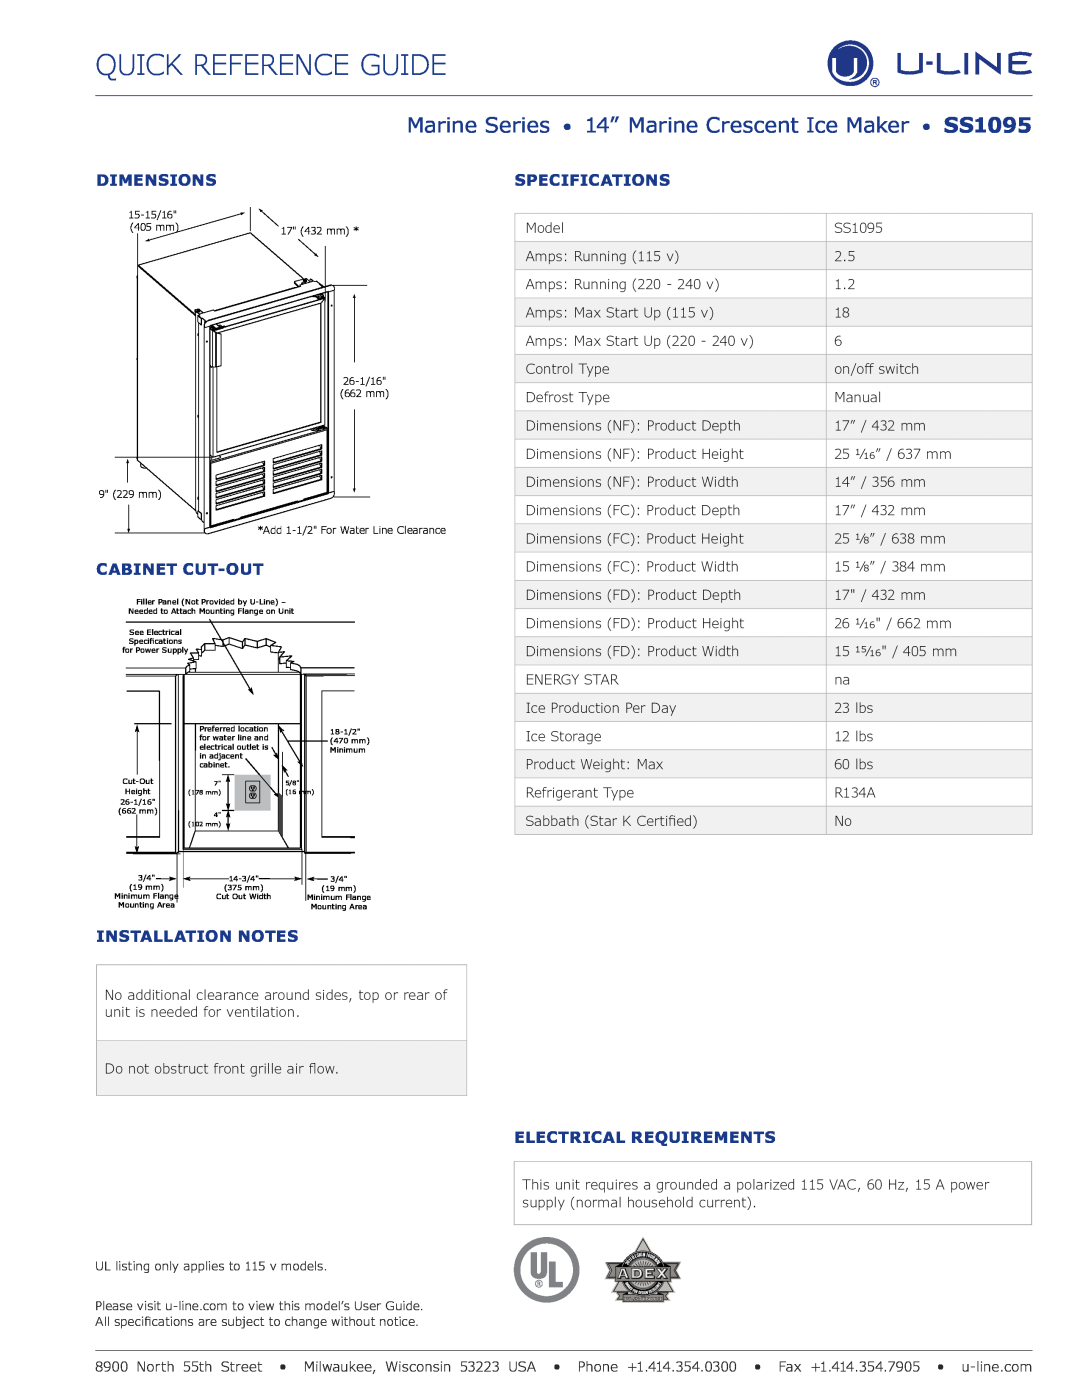 U-Line ULN-SS1095NFS-20A 220 - 240 Dimensions, Specifications, Cabinet Cut-Out, Installation Notes, Quick Reference Guide 